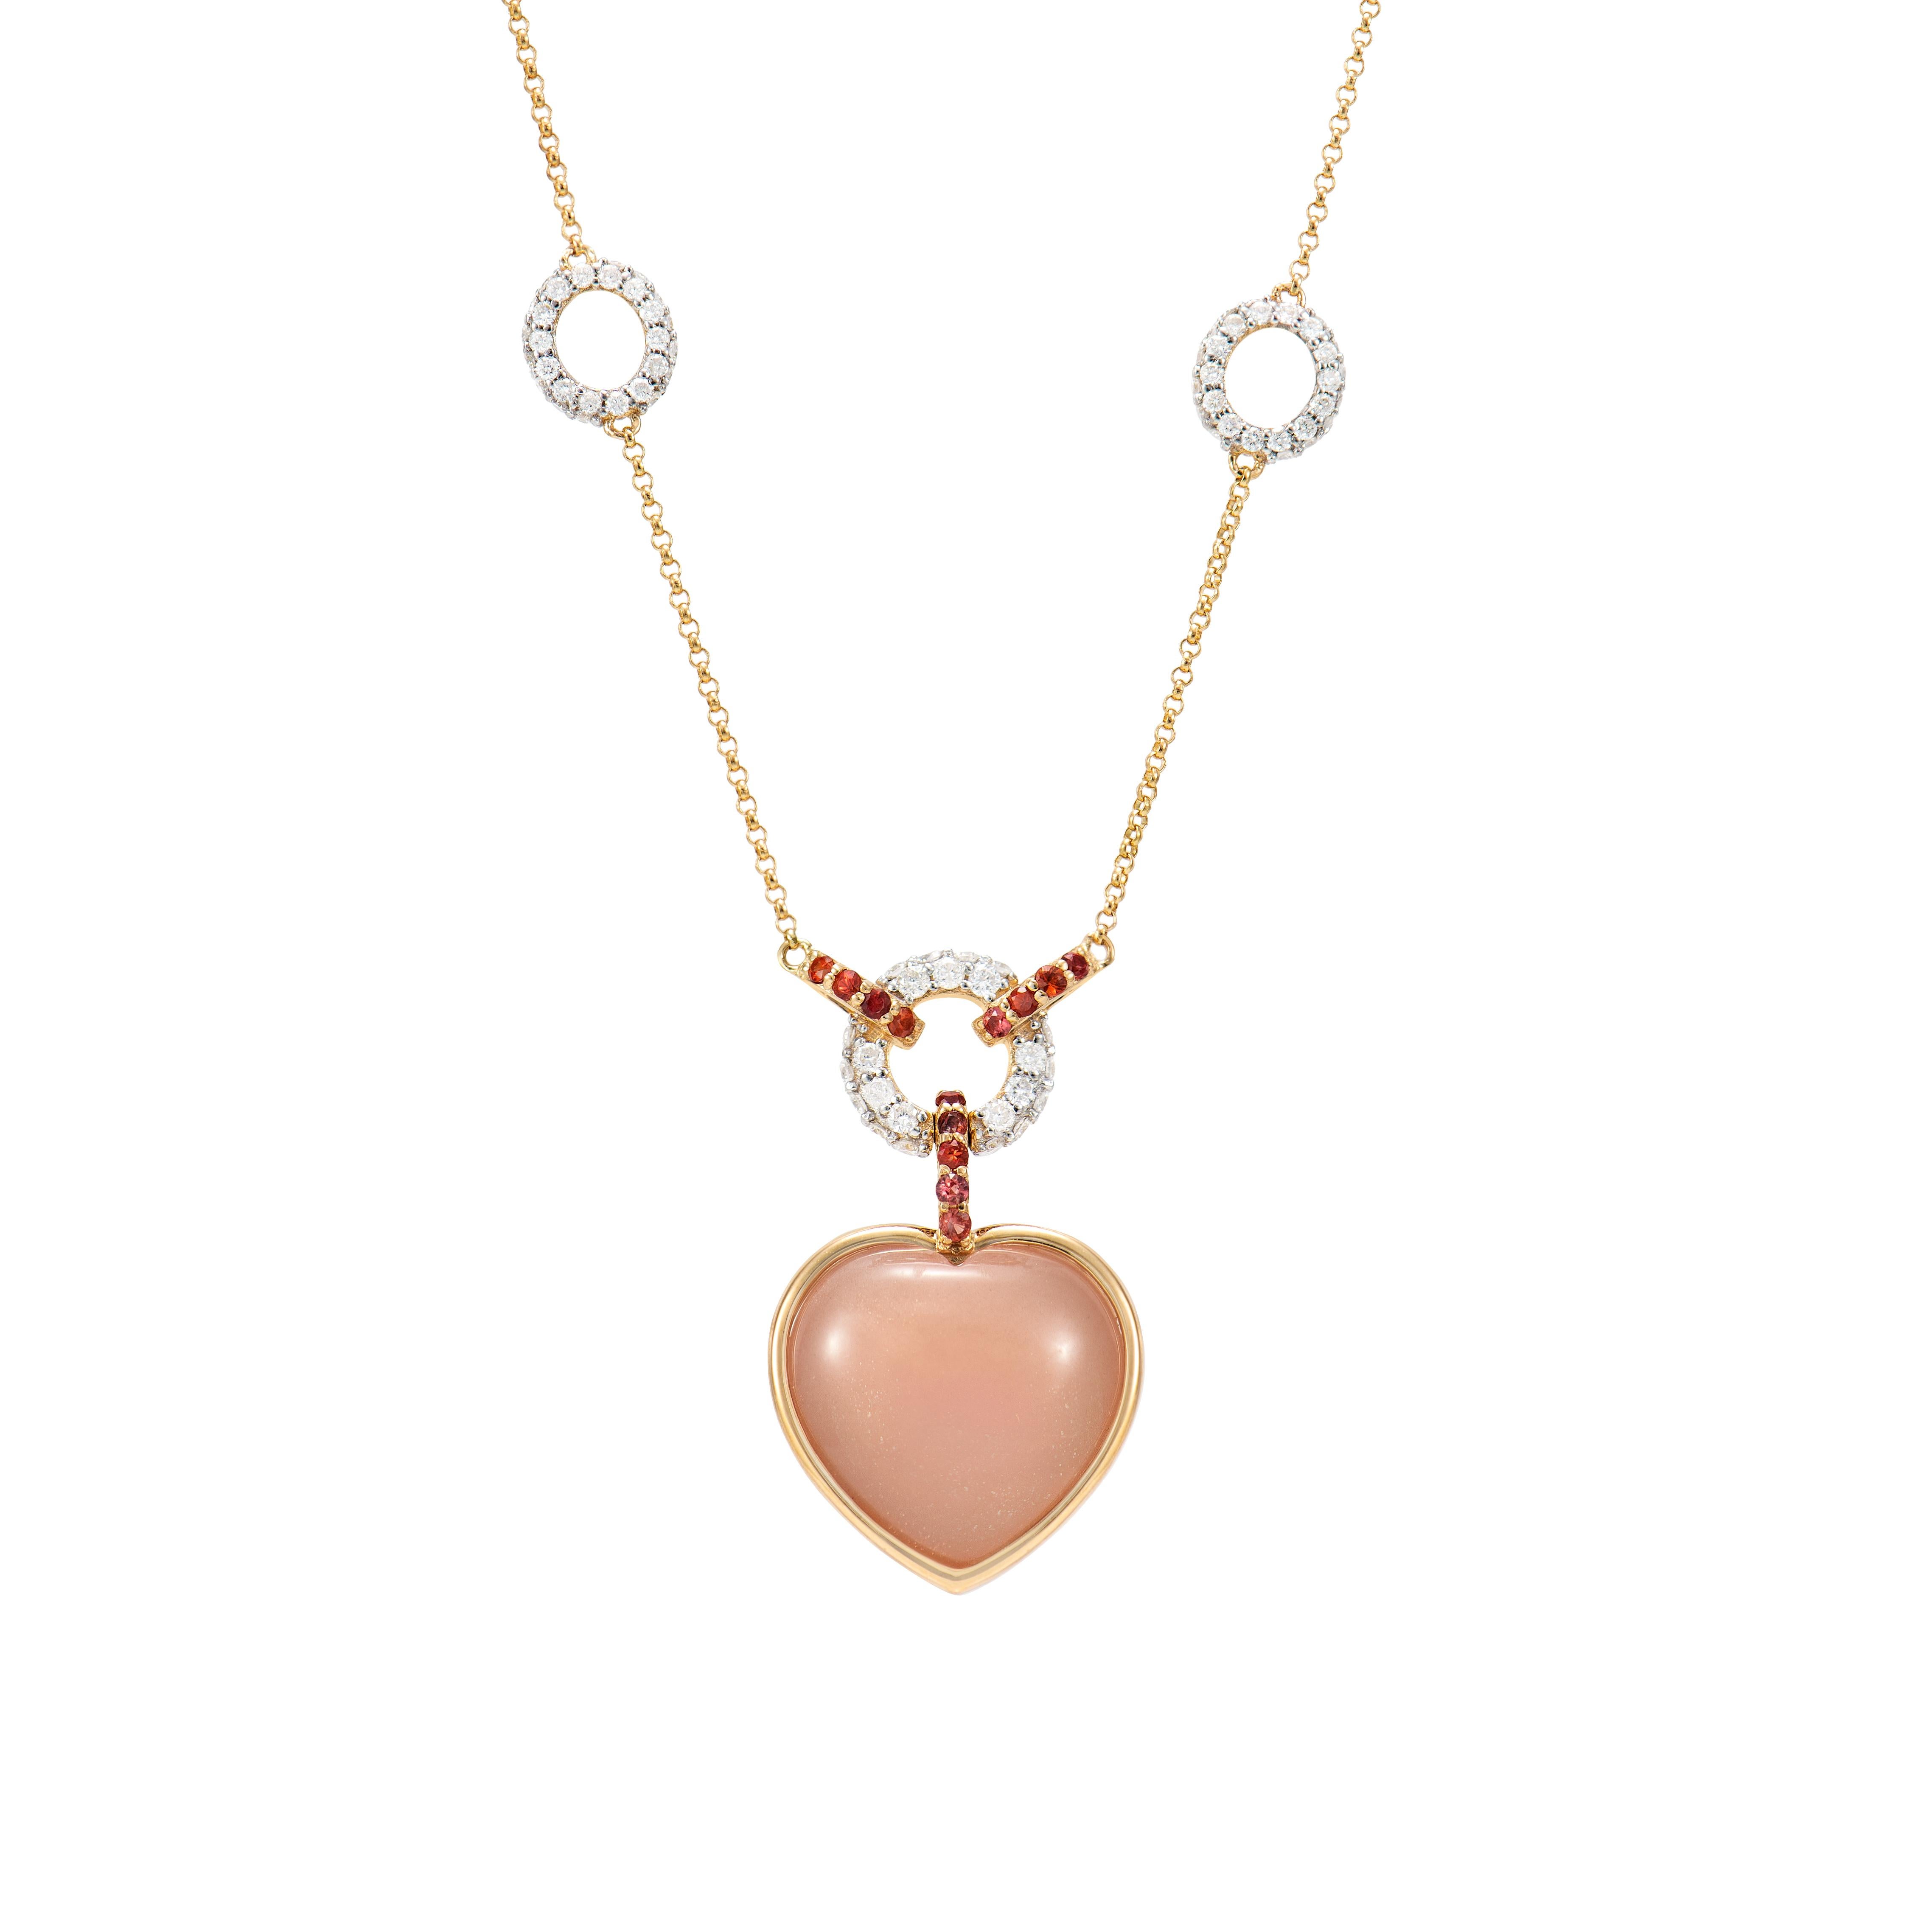 Heart Cut Moonstone Necklace in 18 Karat Yellow Gold with Sapphire and Diamond For Sale